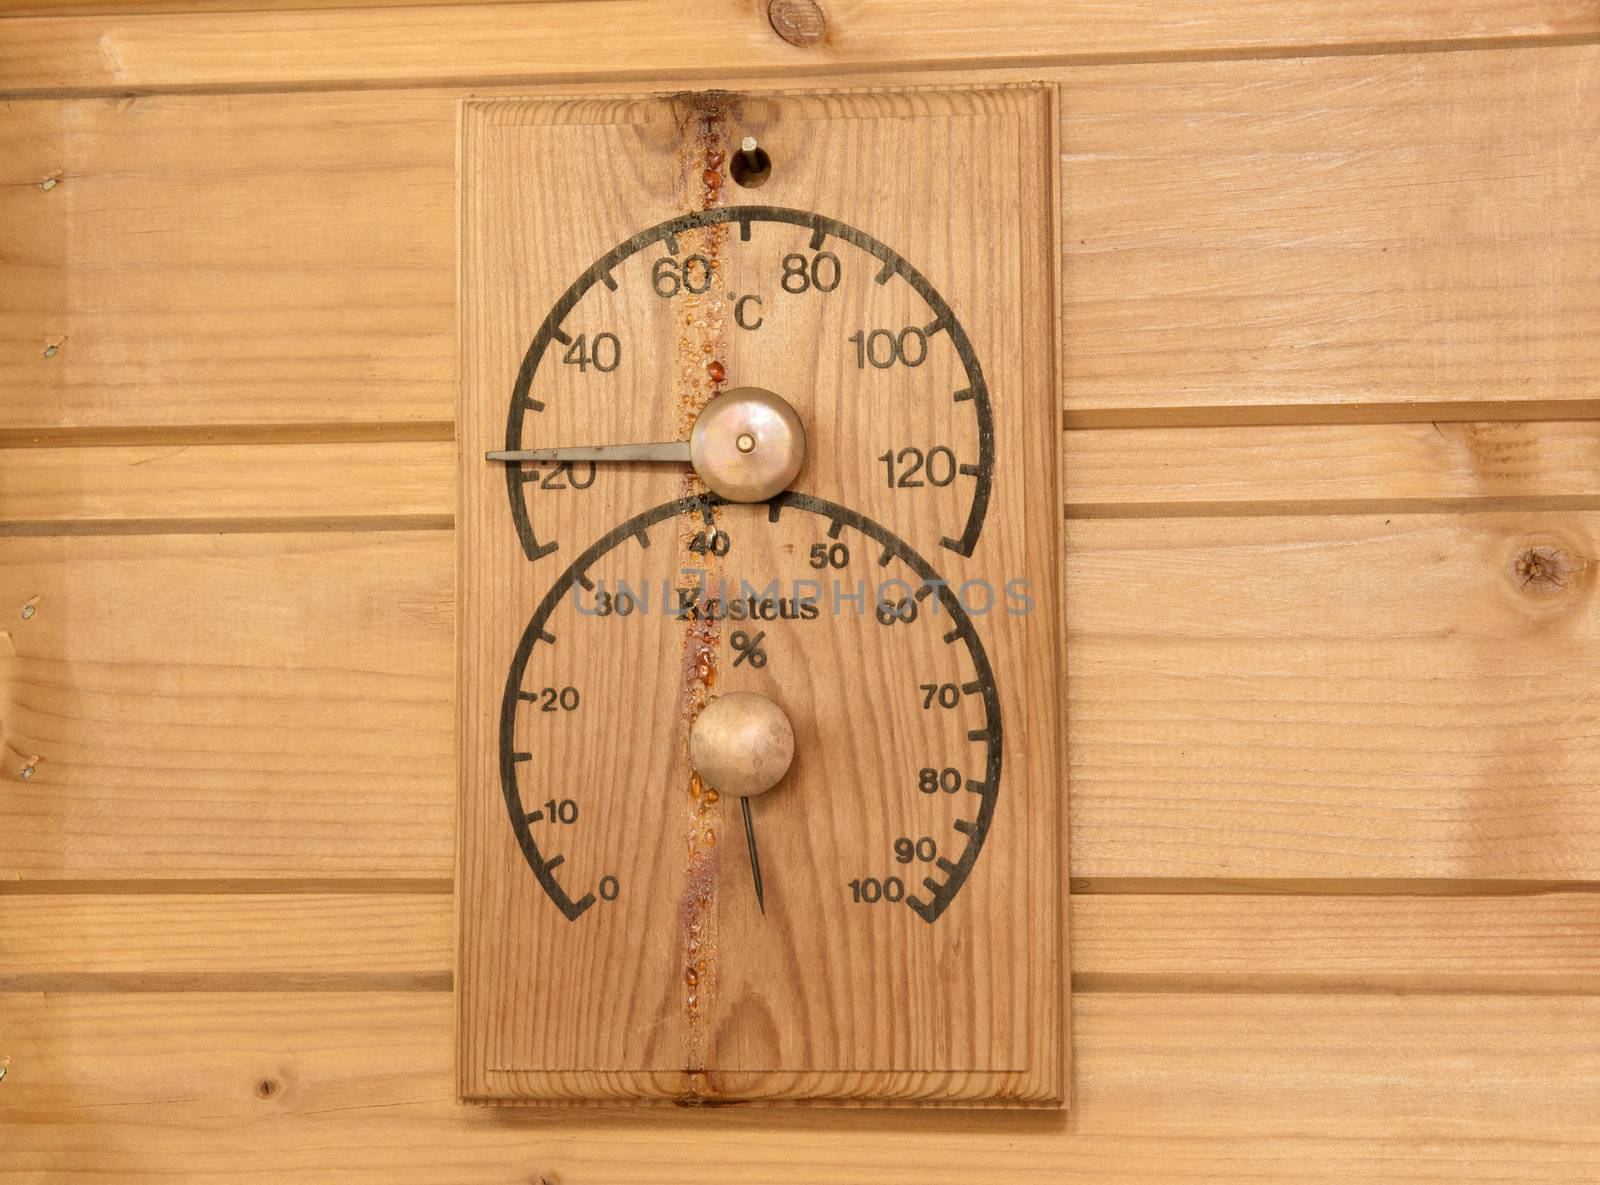 Thermometer in the Finnish sauna by Alenmax